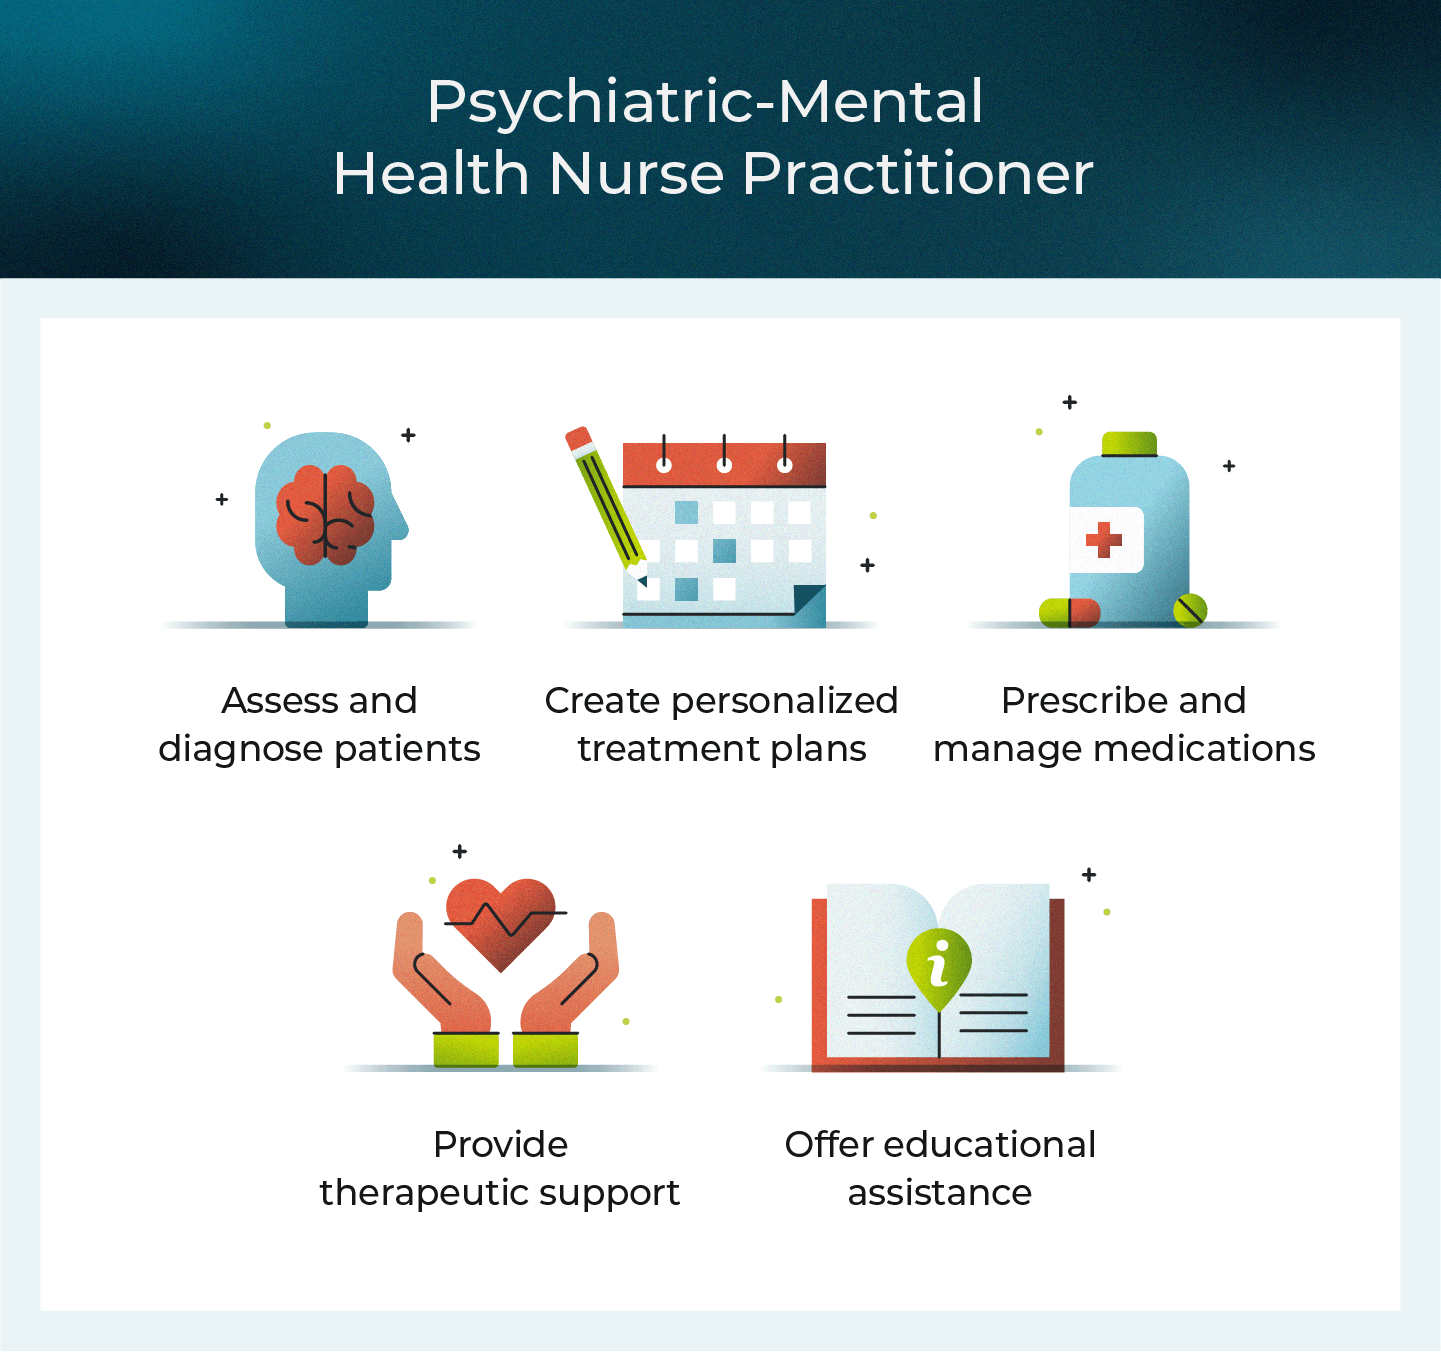 A “How to become a psychiatric mental health nurse practitioner” infographic details five duties for the role.